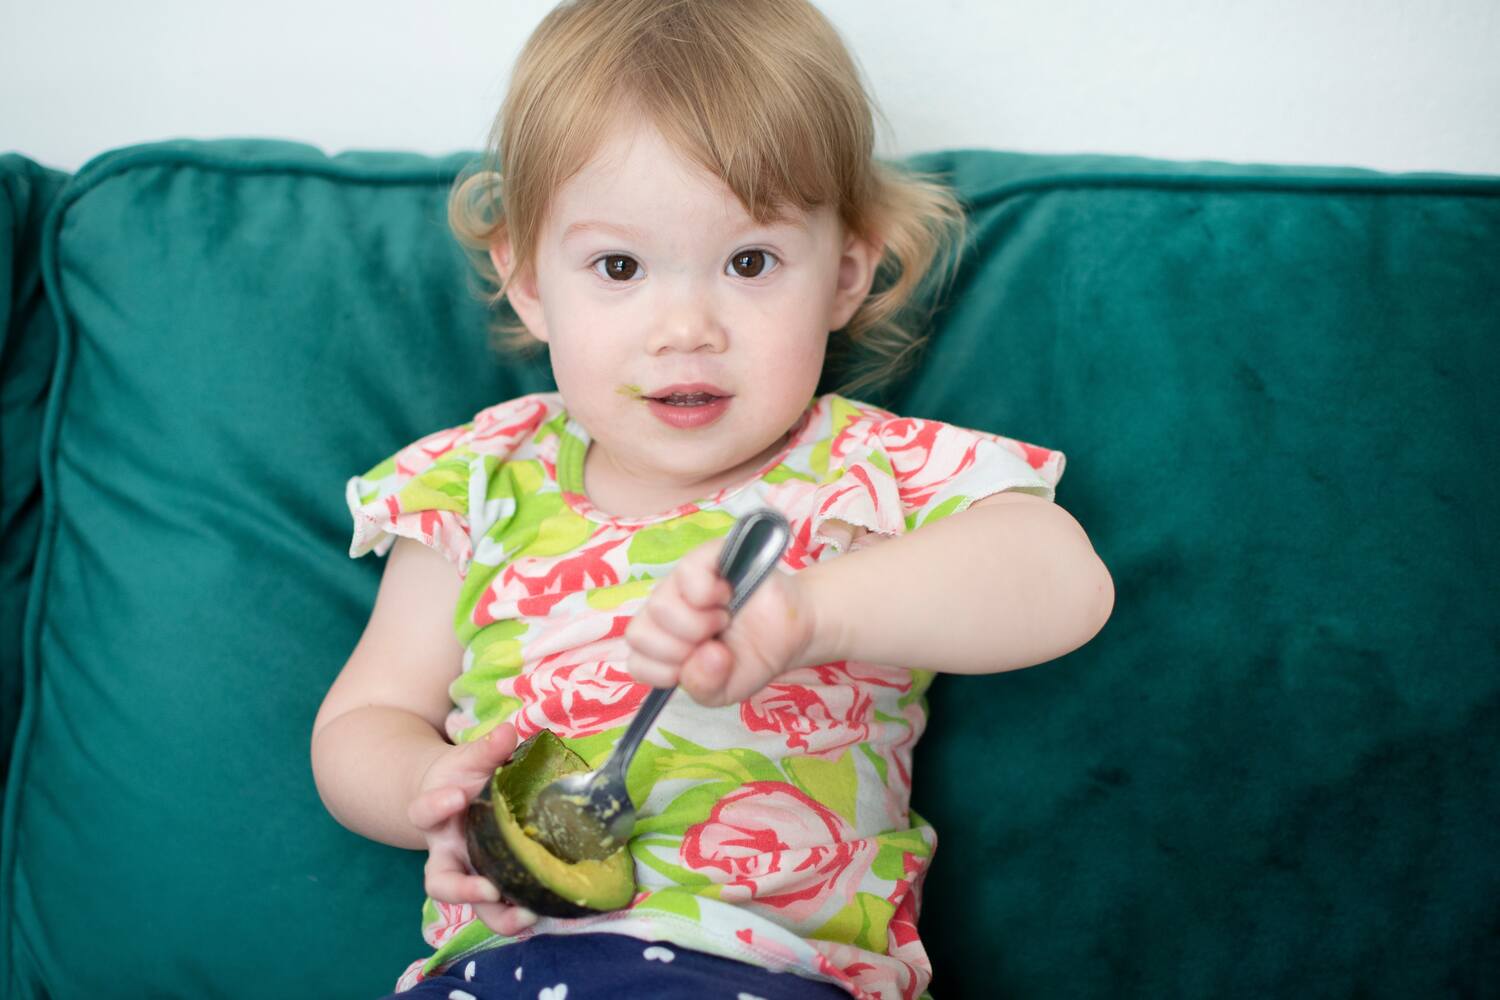 Give your toddler avocado, a superfood